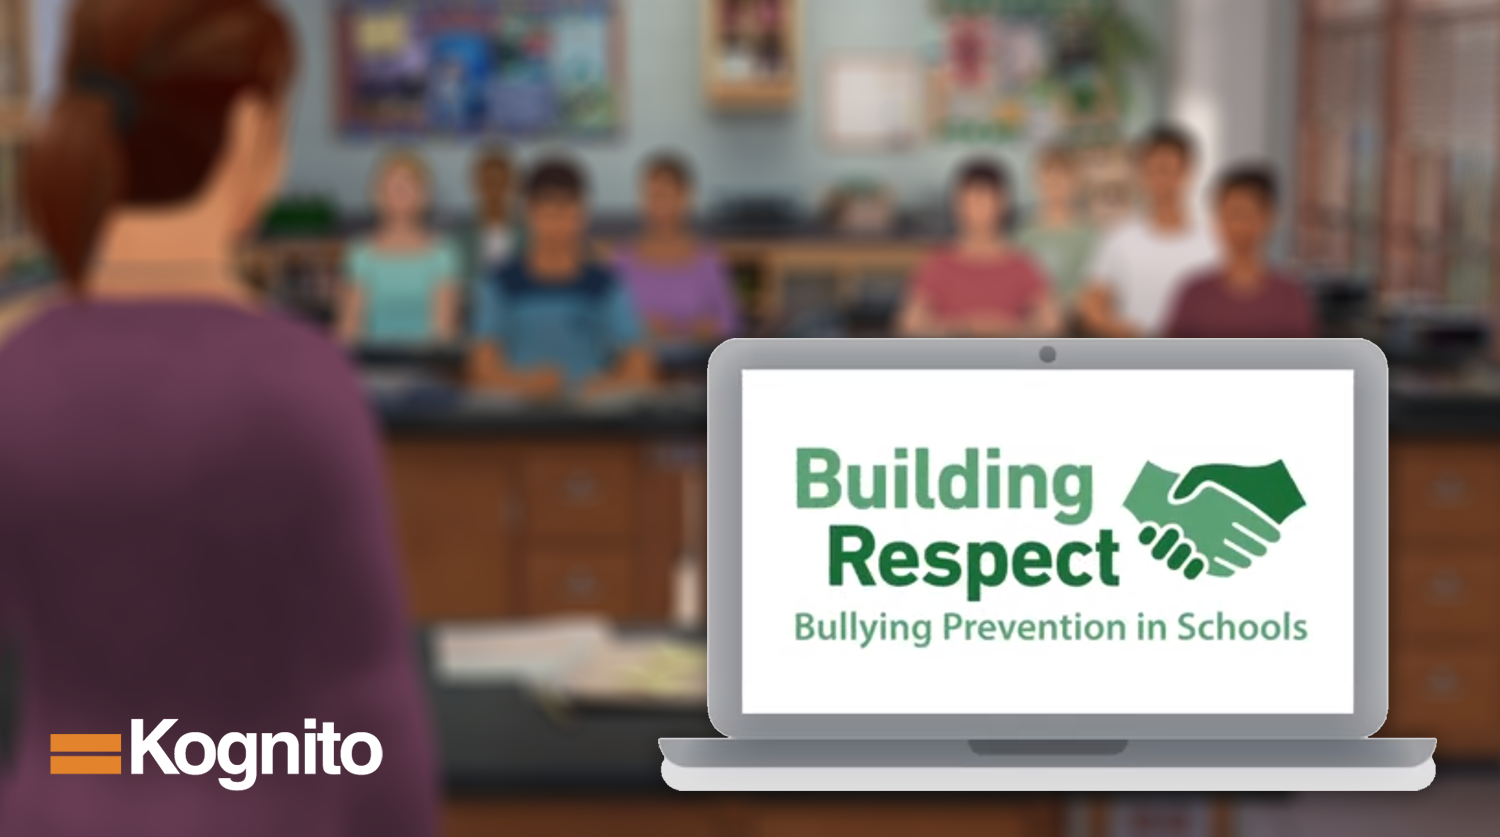 Building Respect: A Bullying Prevention Simulation to Promote Safer Schools